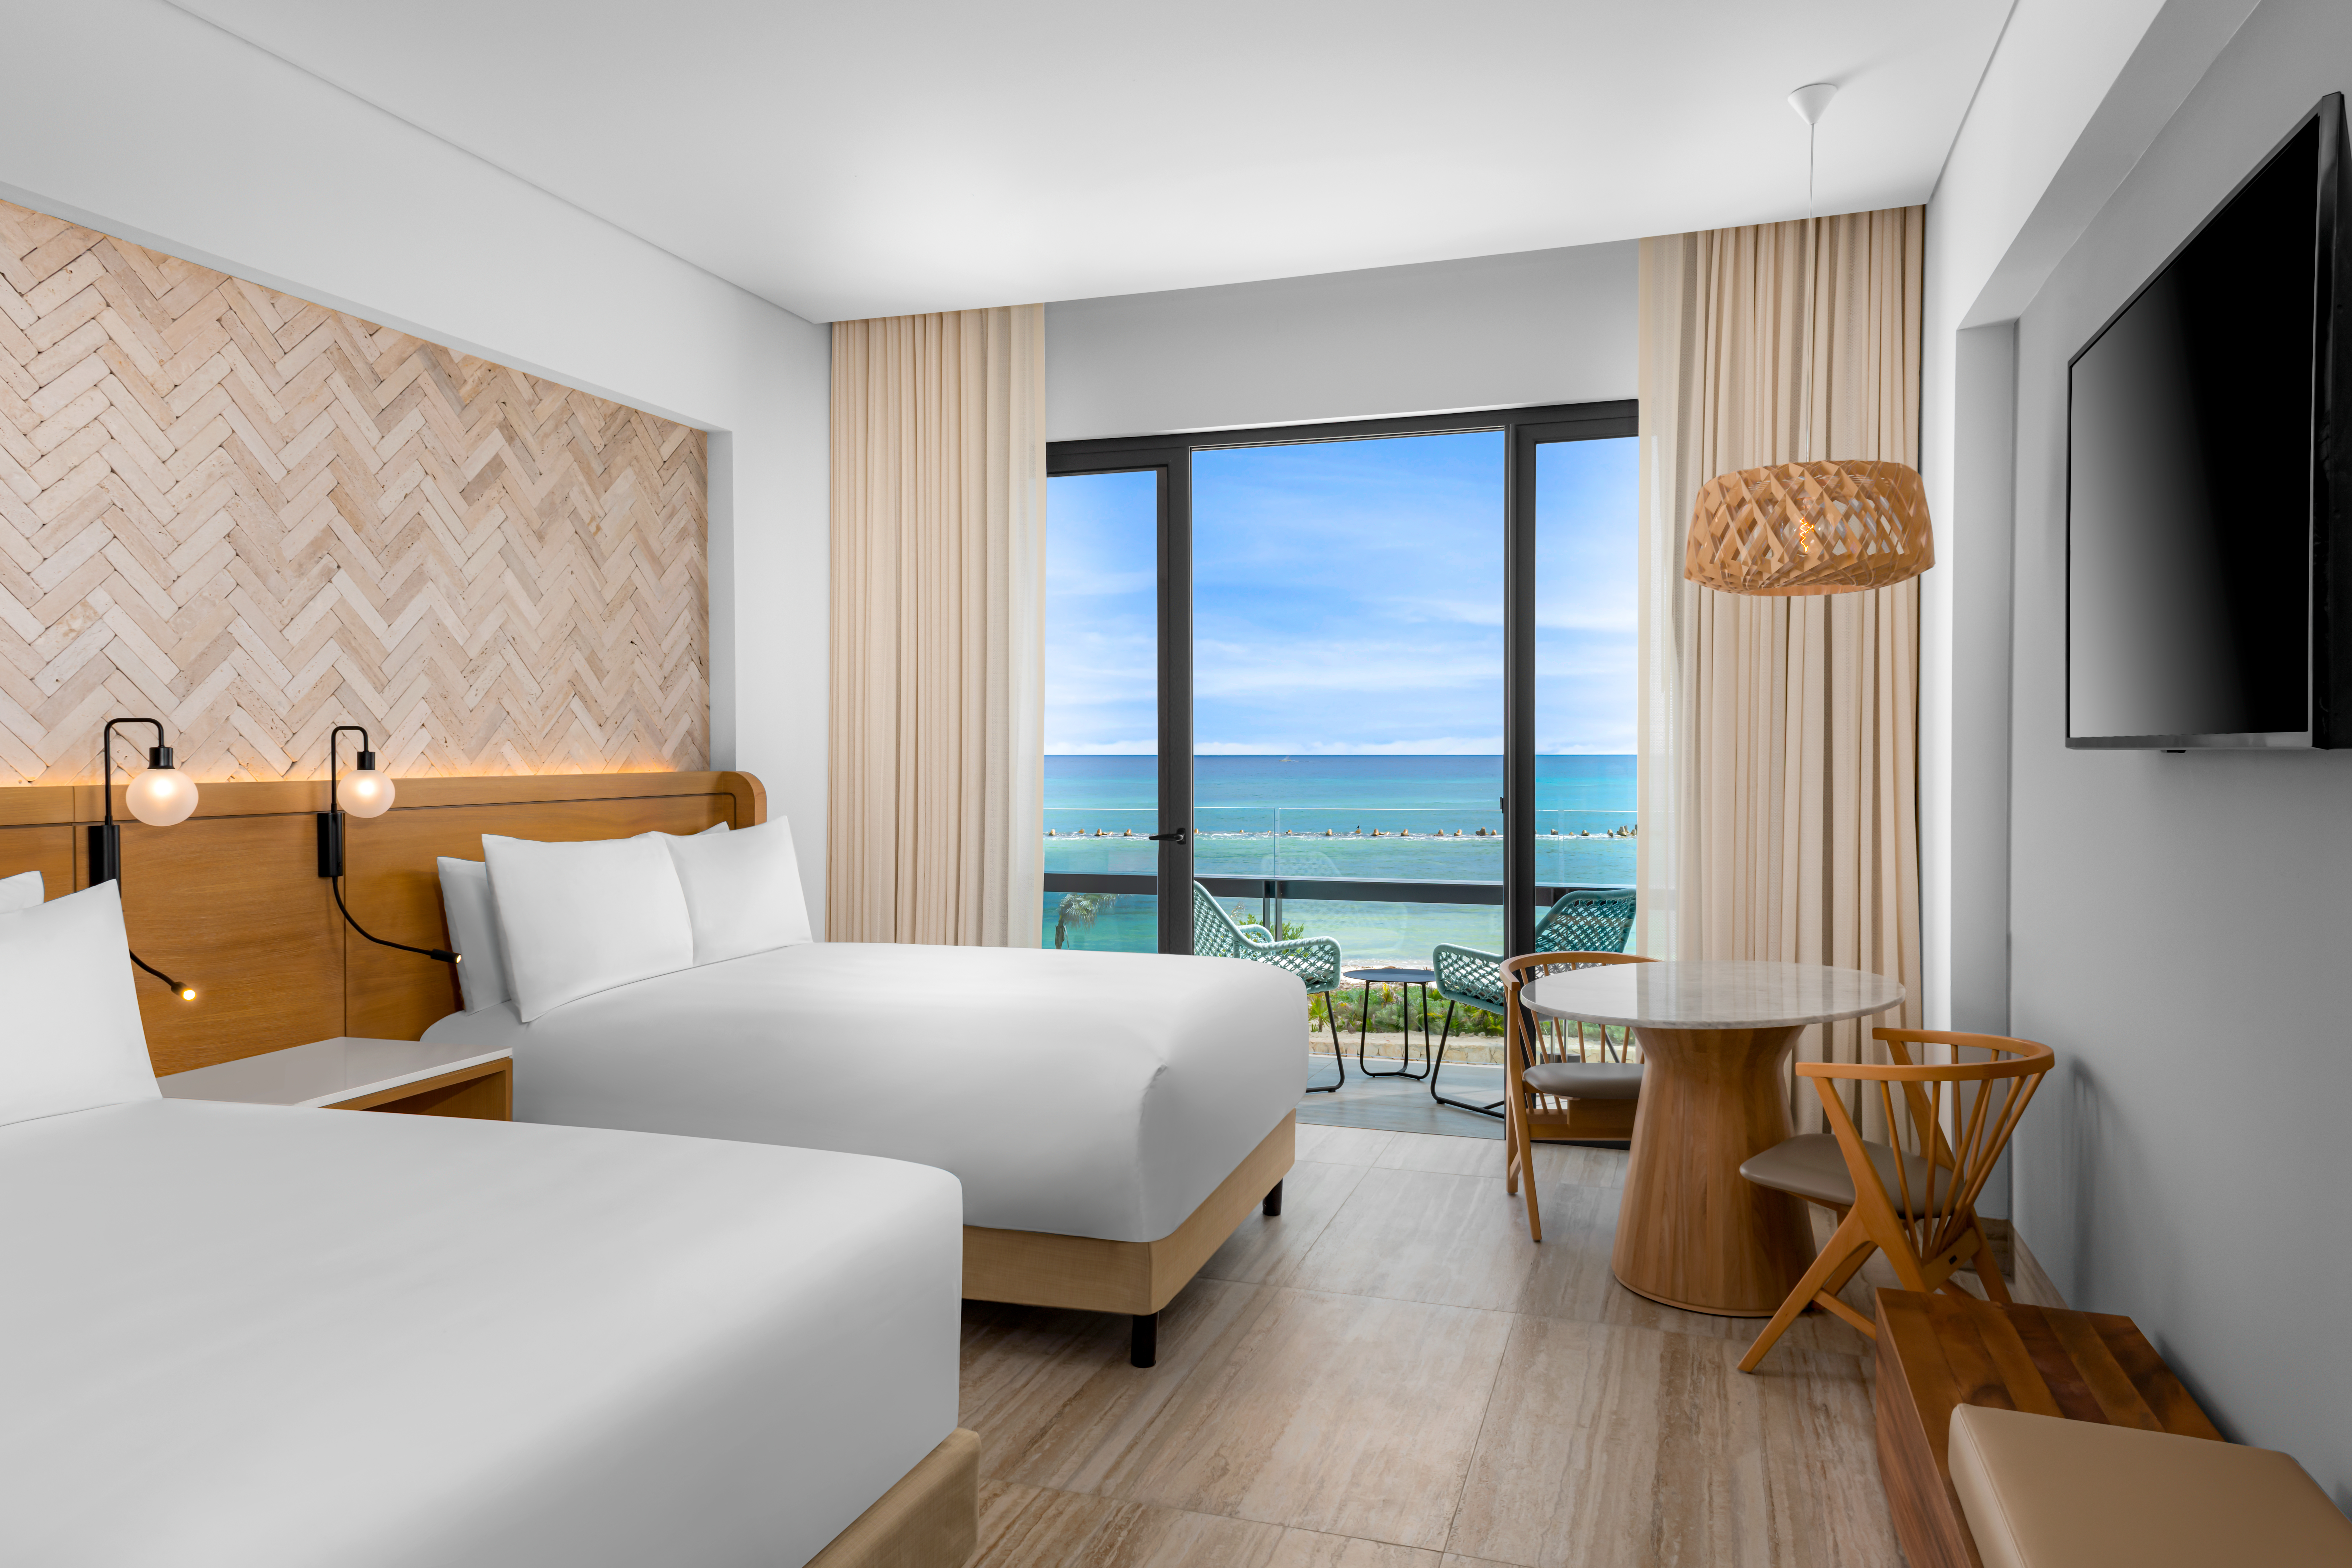 Beds with an ocean view hilton tulum